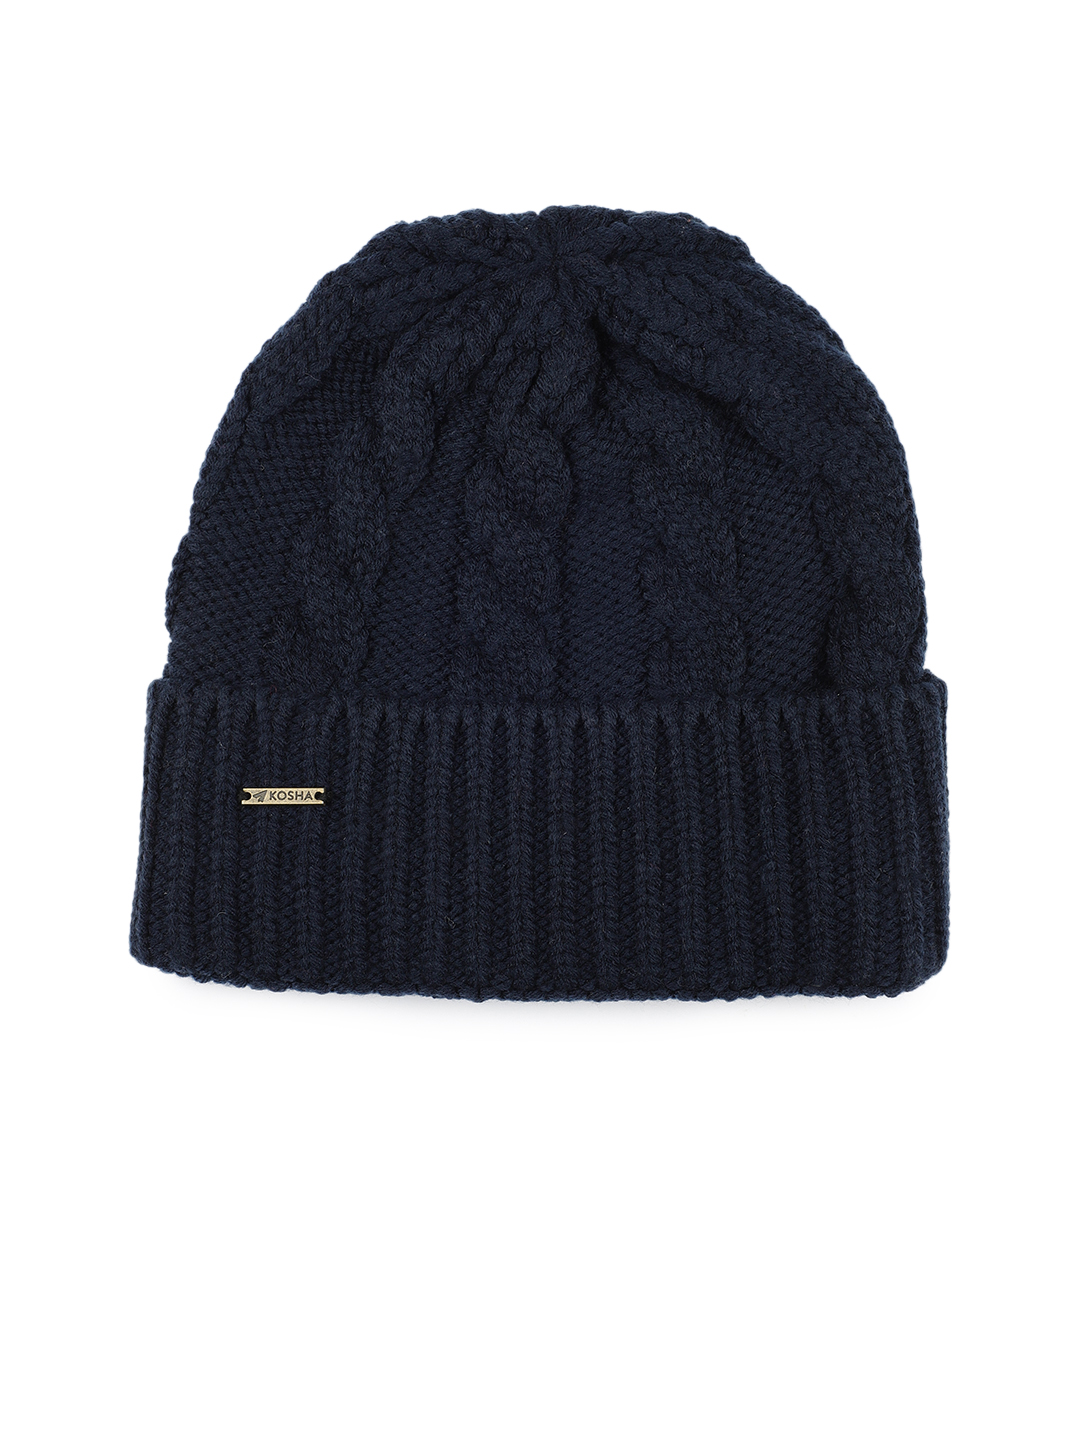 Navy Blue Acrylic Wool Cable Knit Winter Beanie | Women